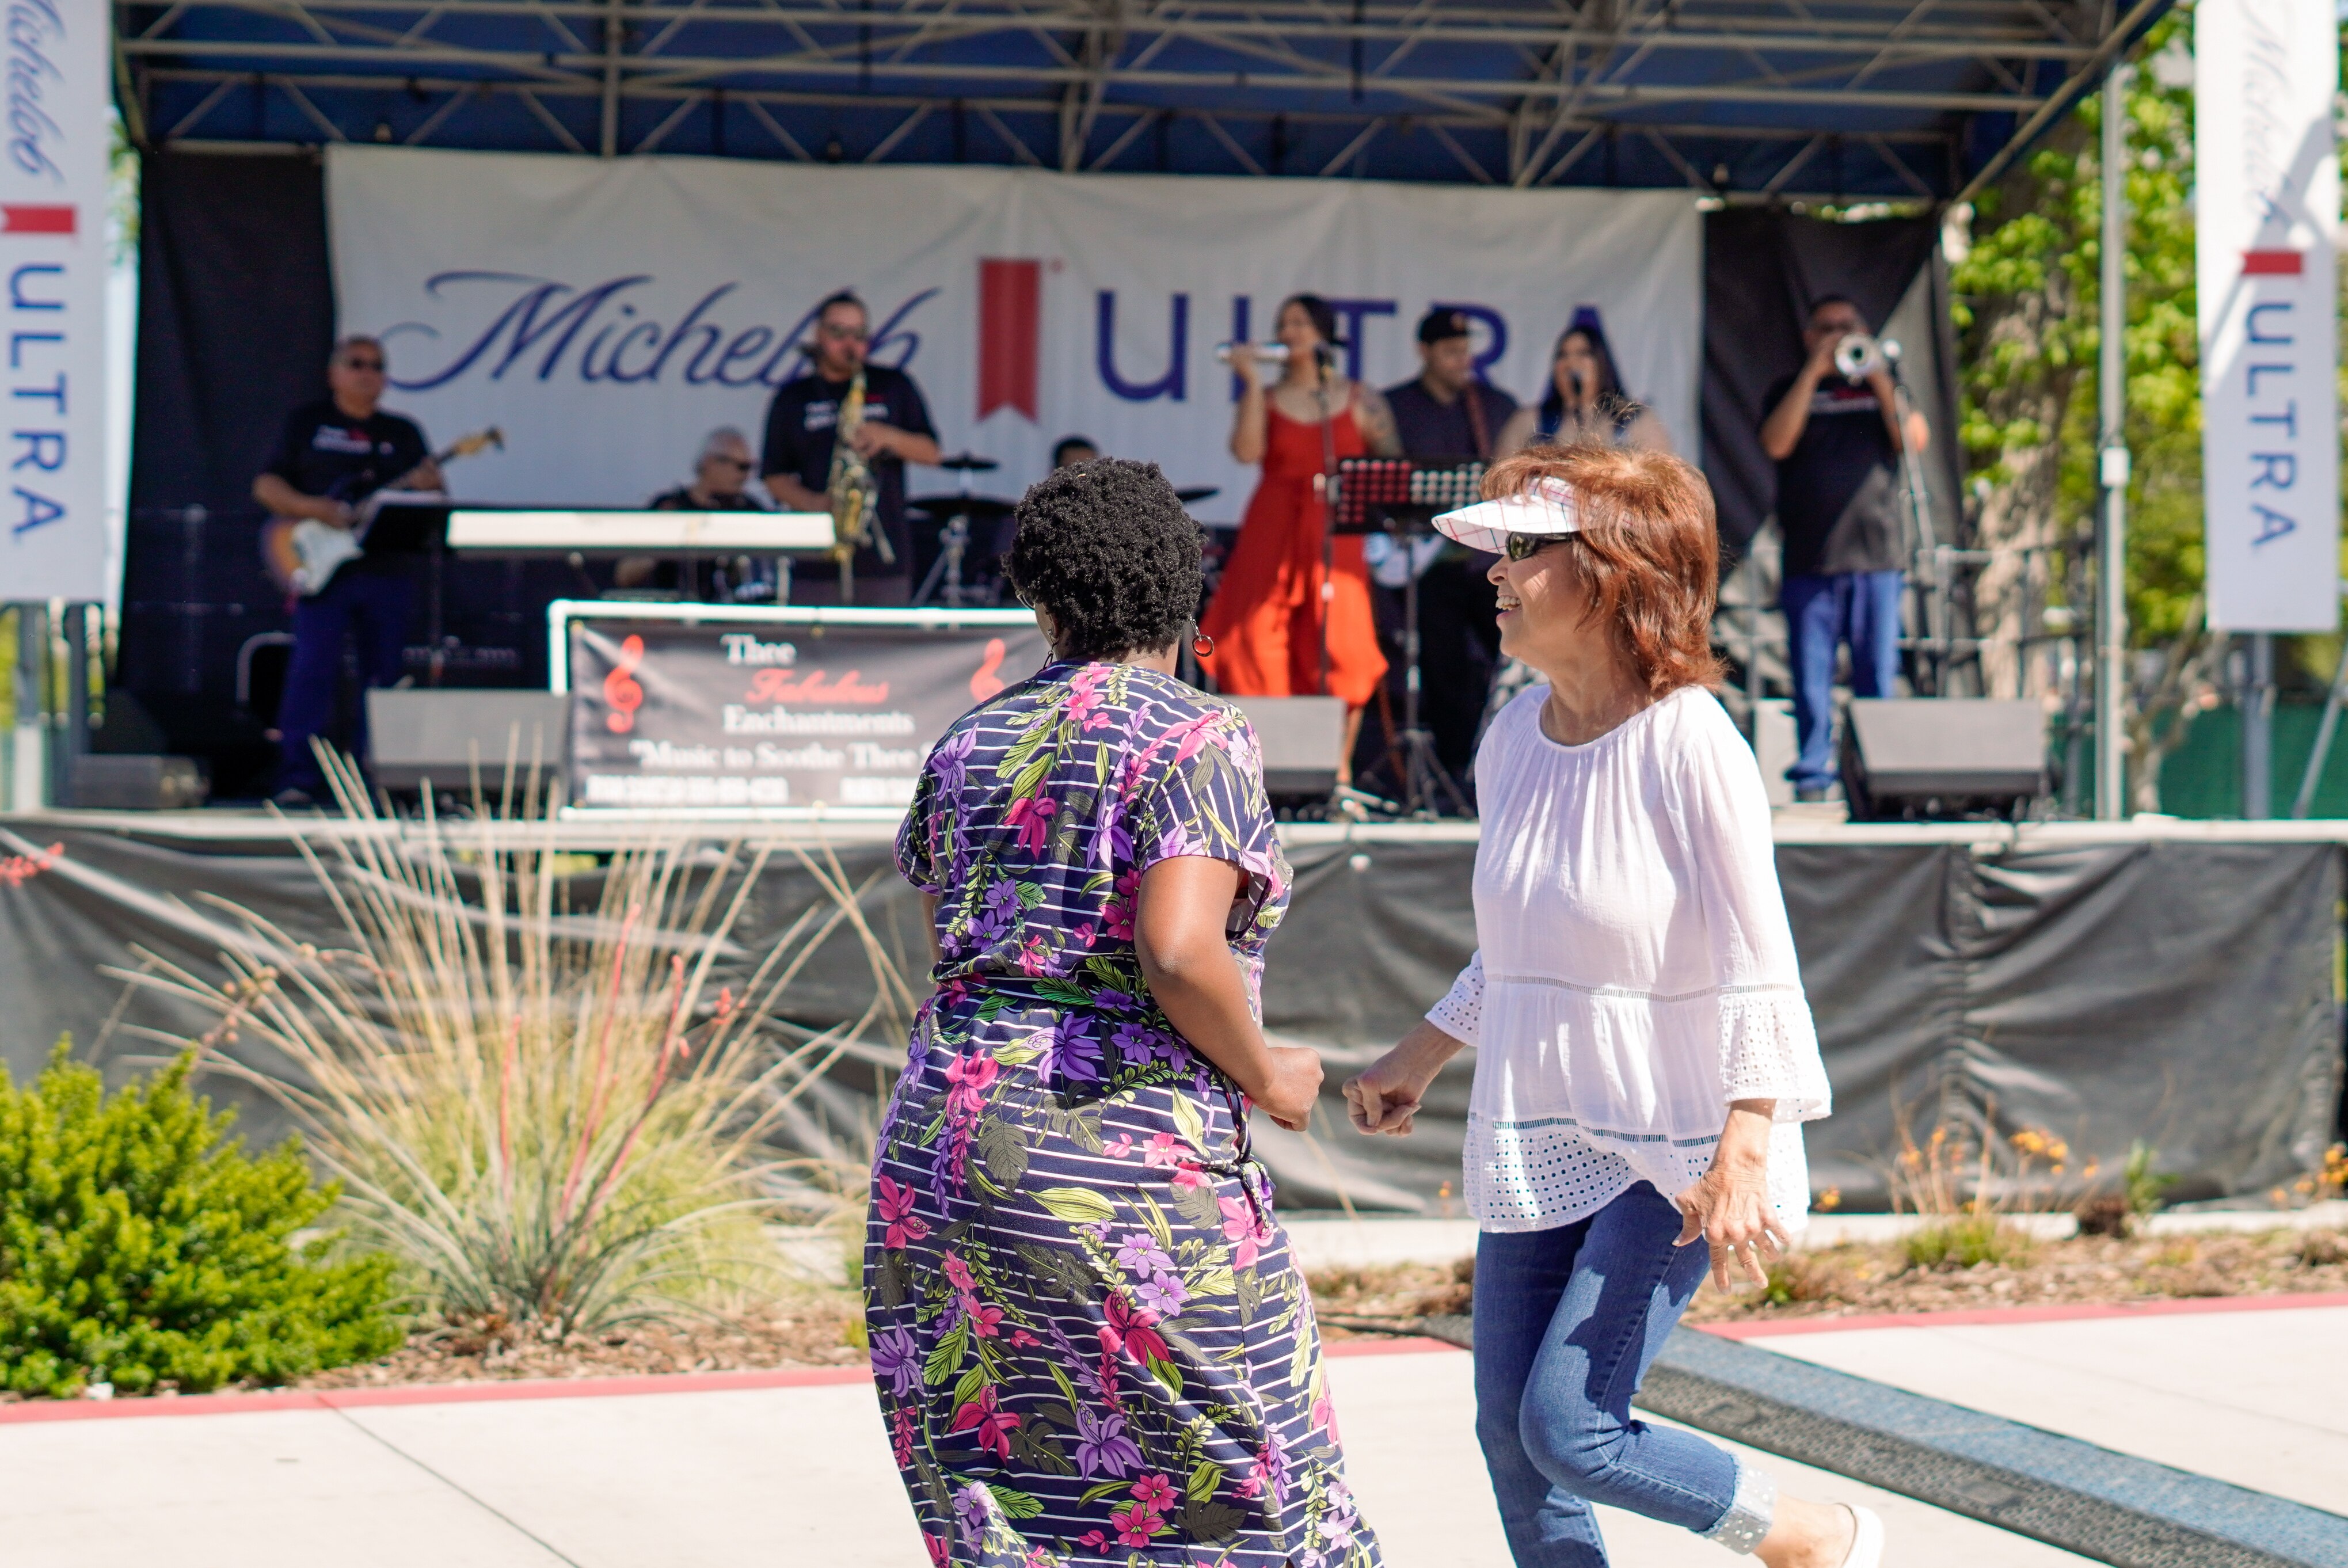 Two women dance in front of the performance stage to live music